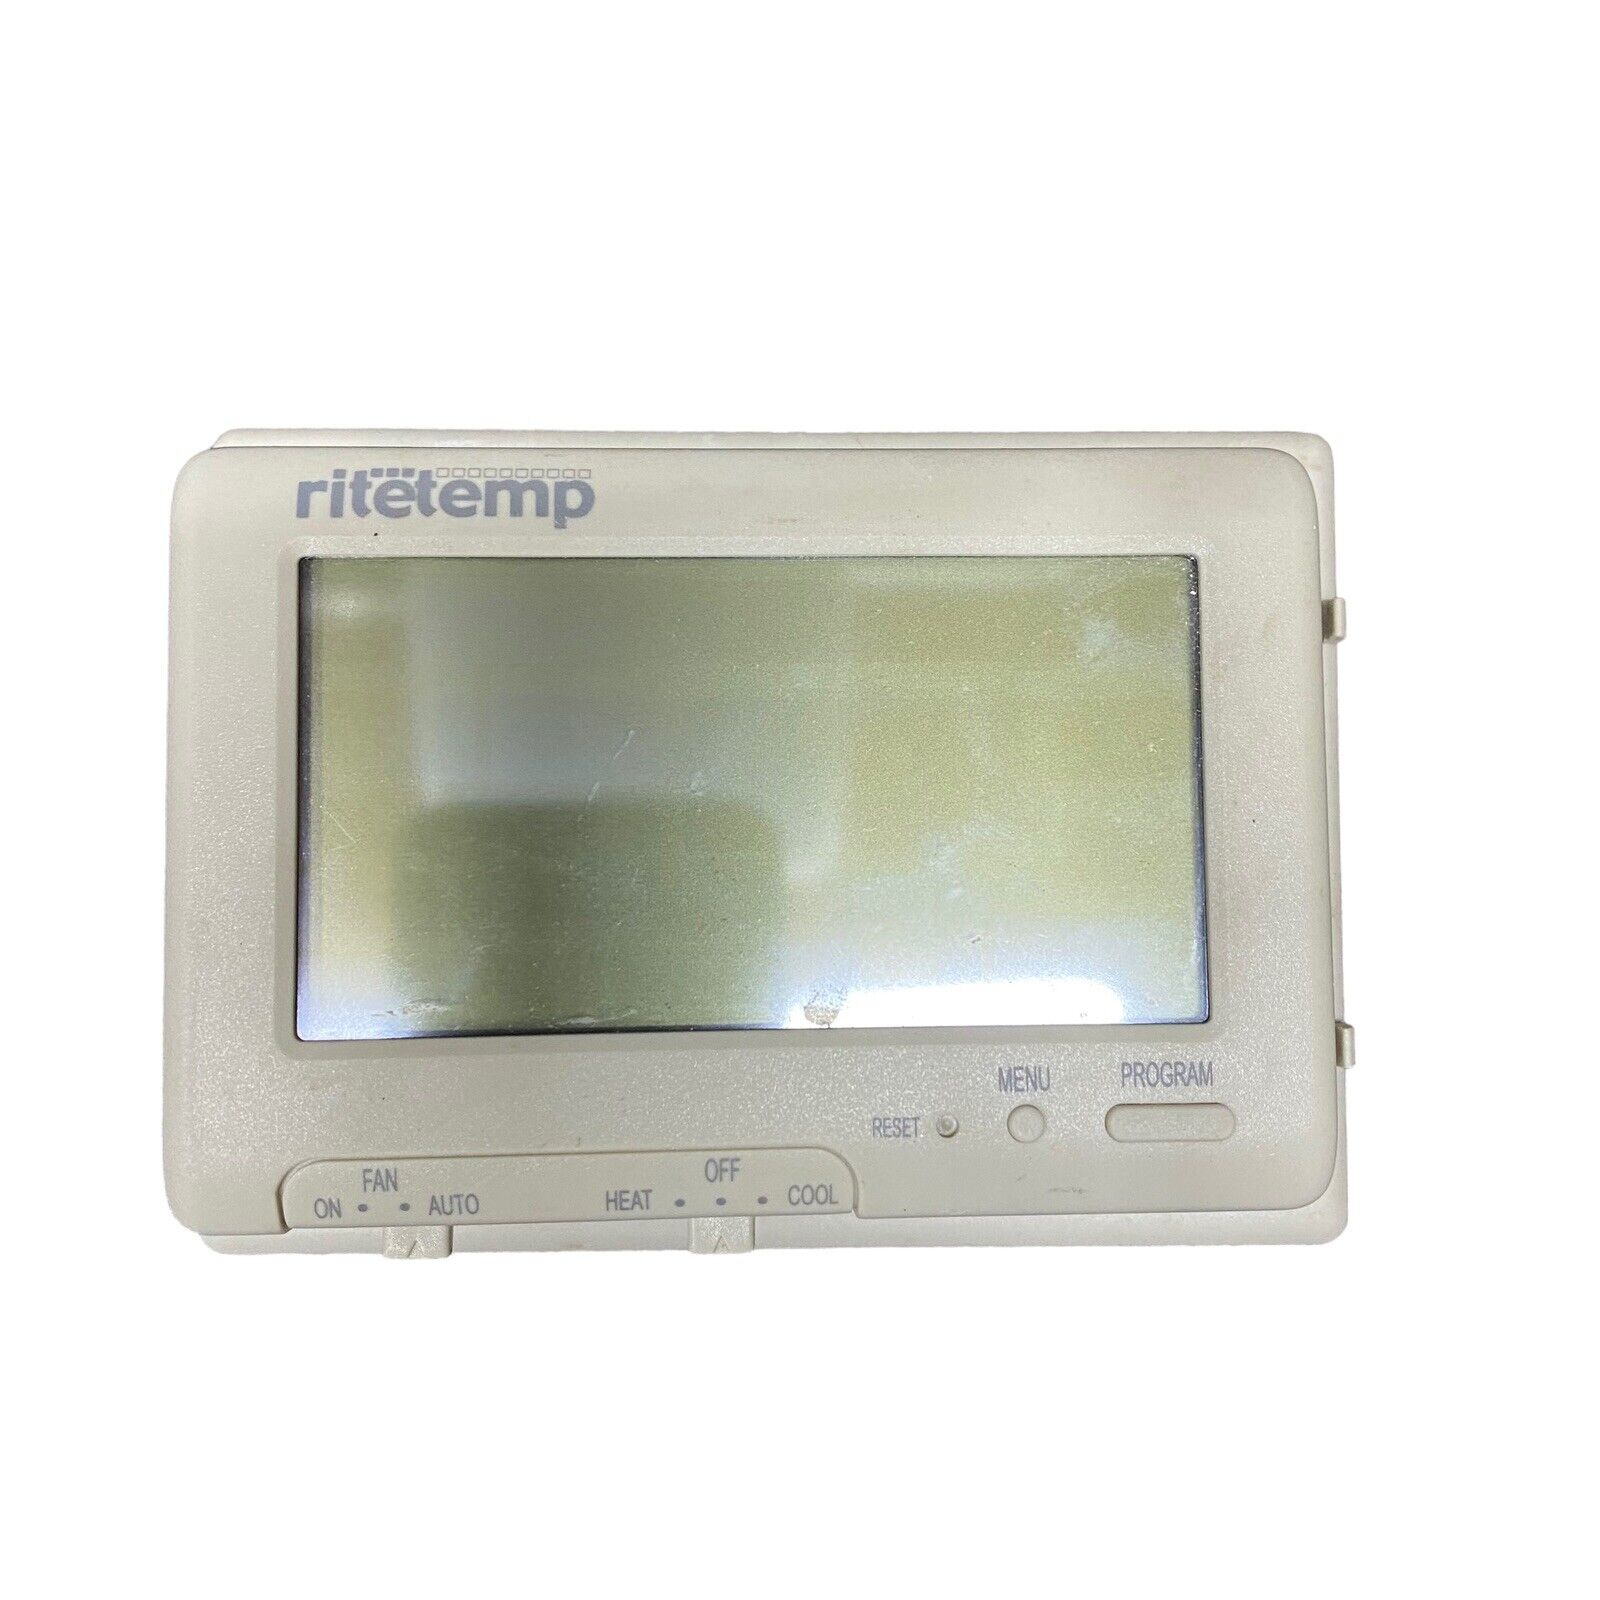 RiteTemp Thermostat 7-Day Programmable Touch Screen Model 8030